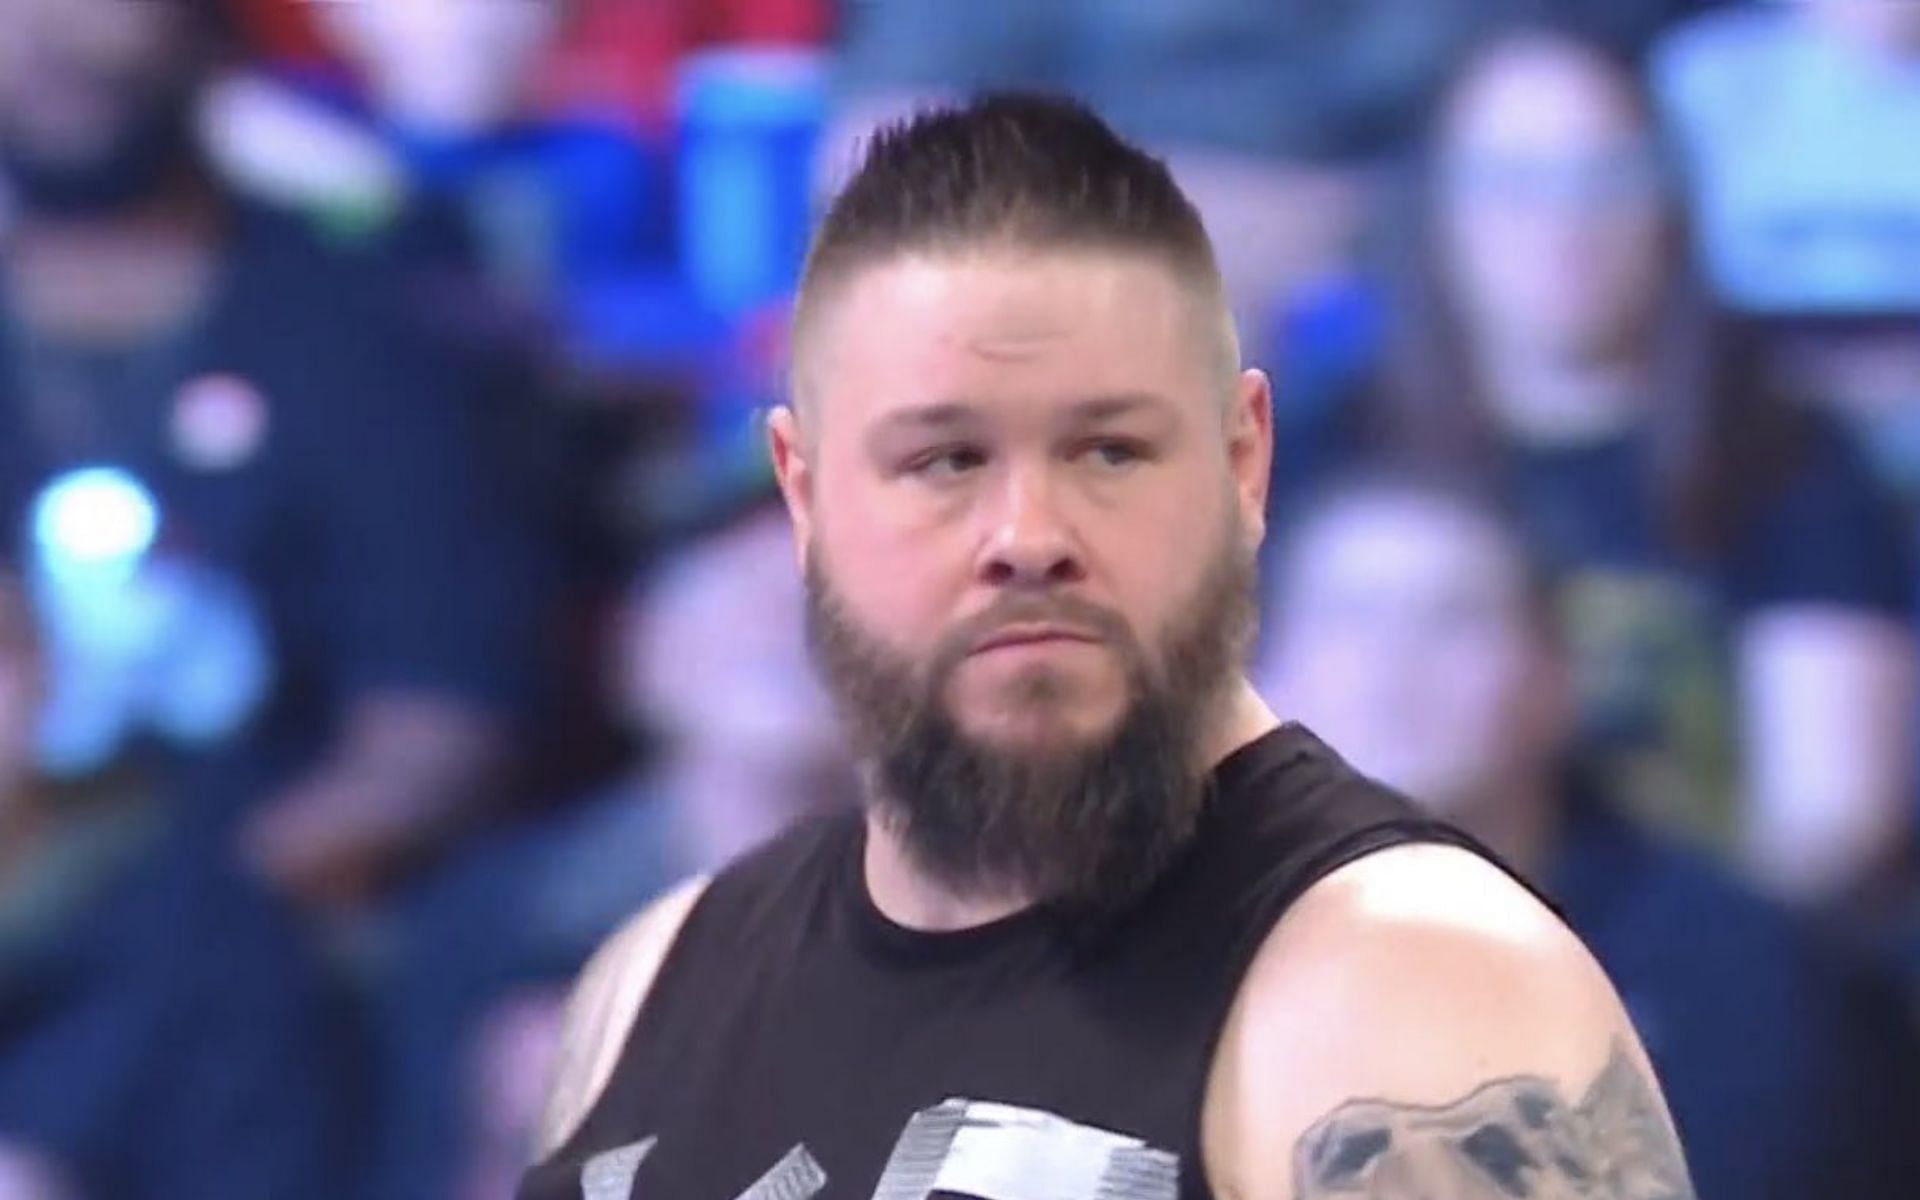 Kevin Owens is set for a Royal Rumble trilogy bout against Roman Reigns